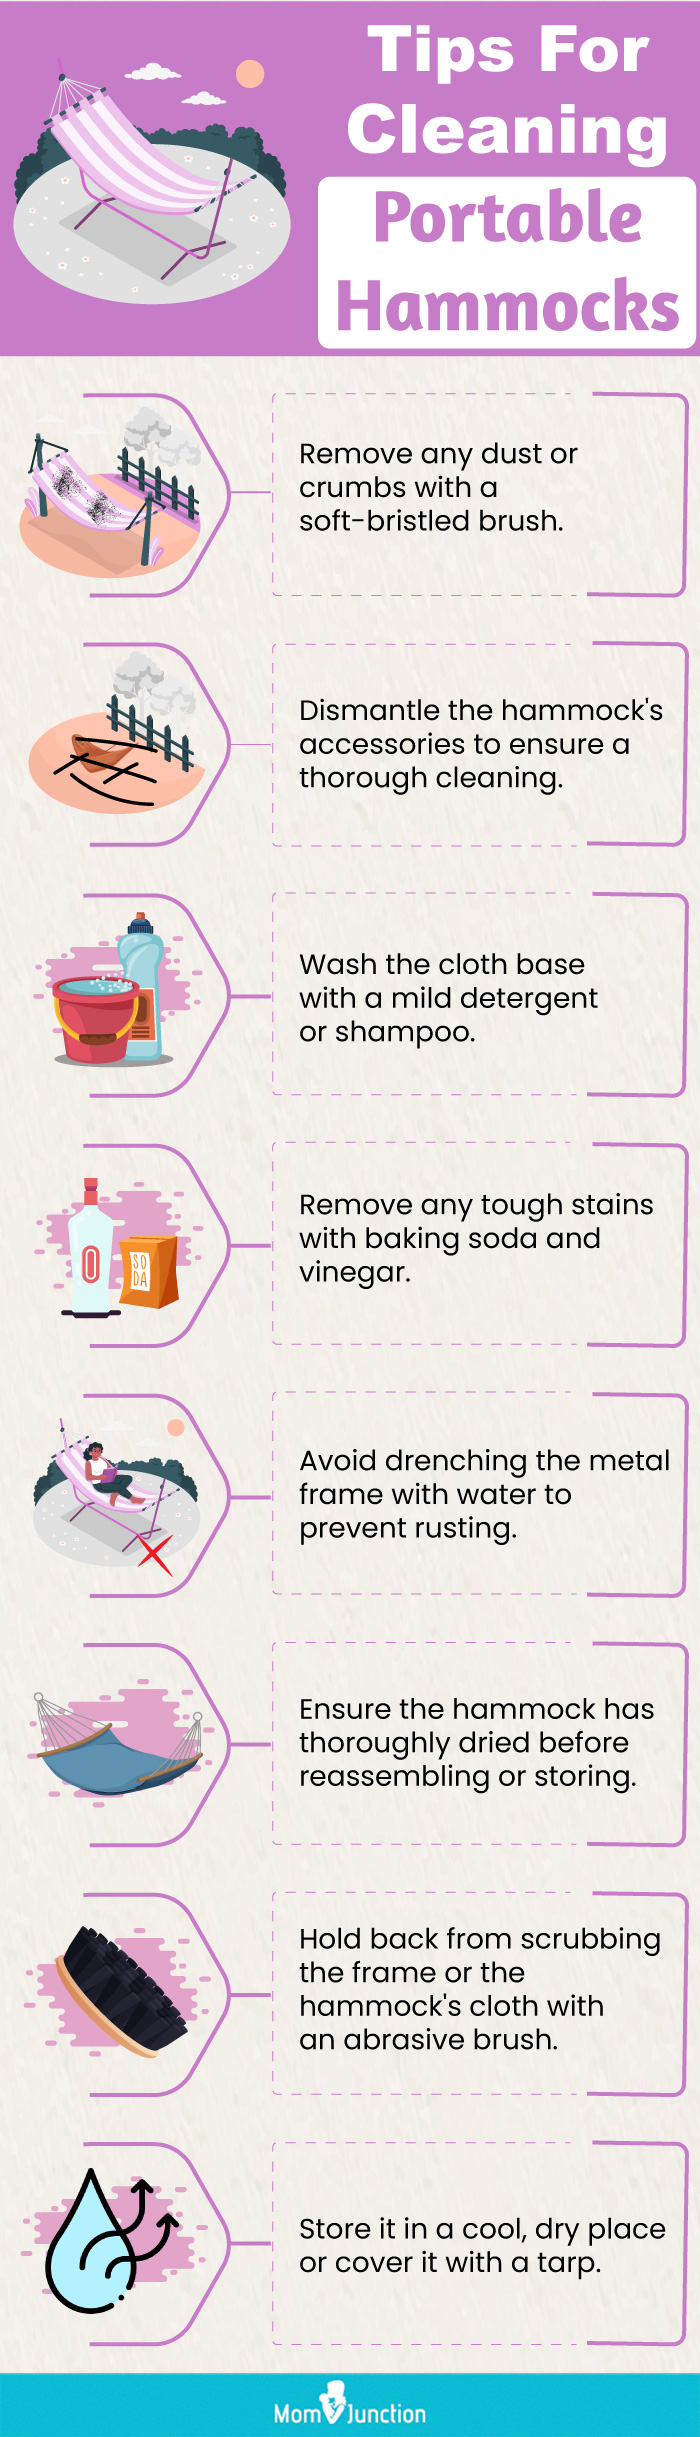 Tips For Cleaning Portable Hammocks (infographic)